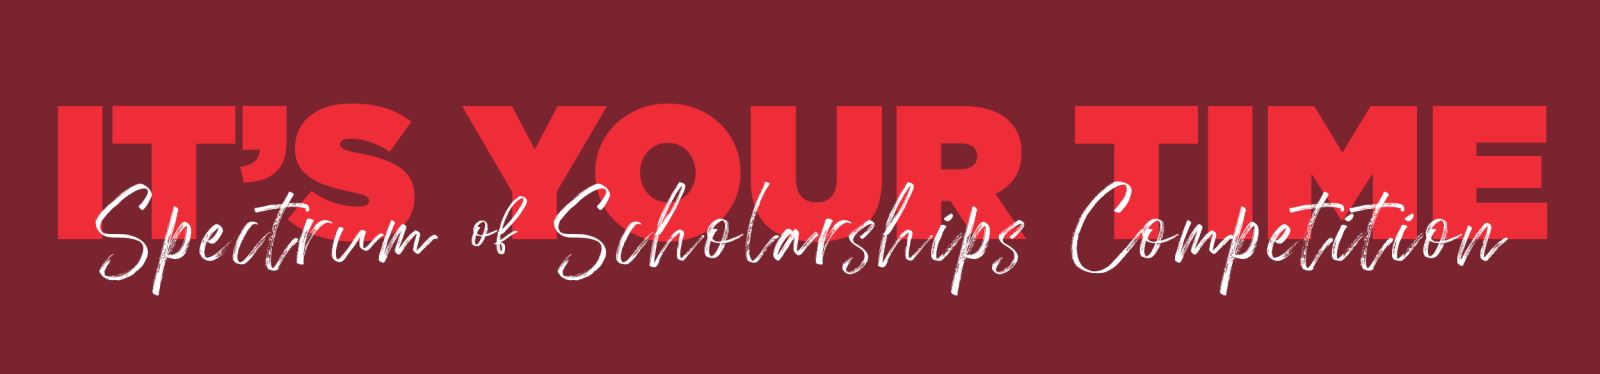 Spectrum of Scholarships Competition